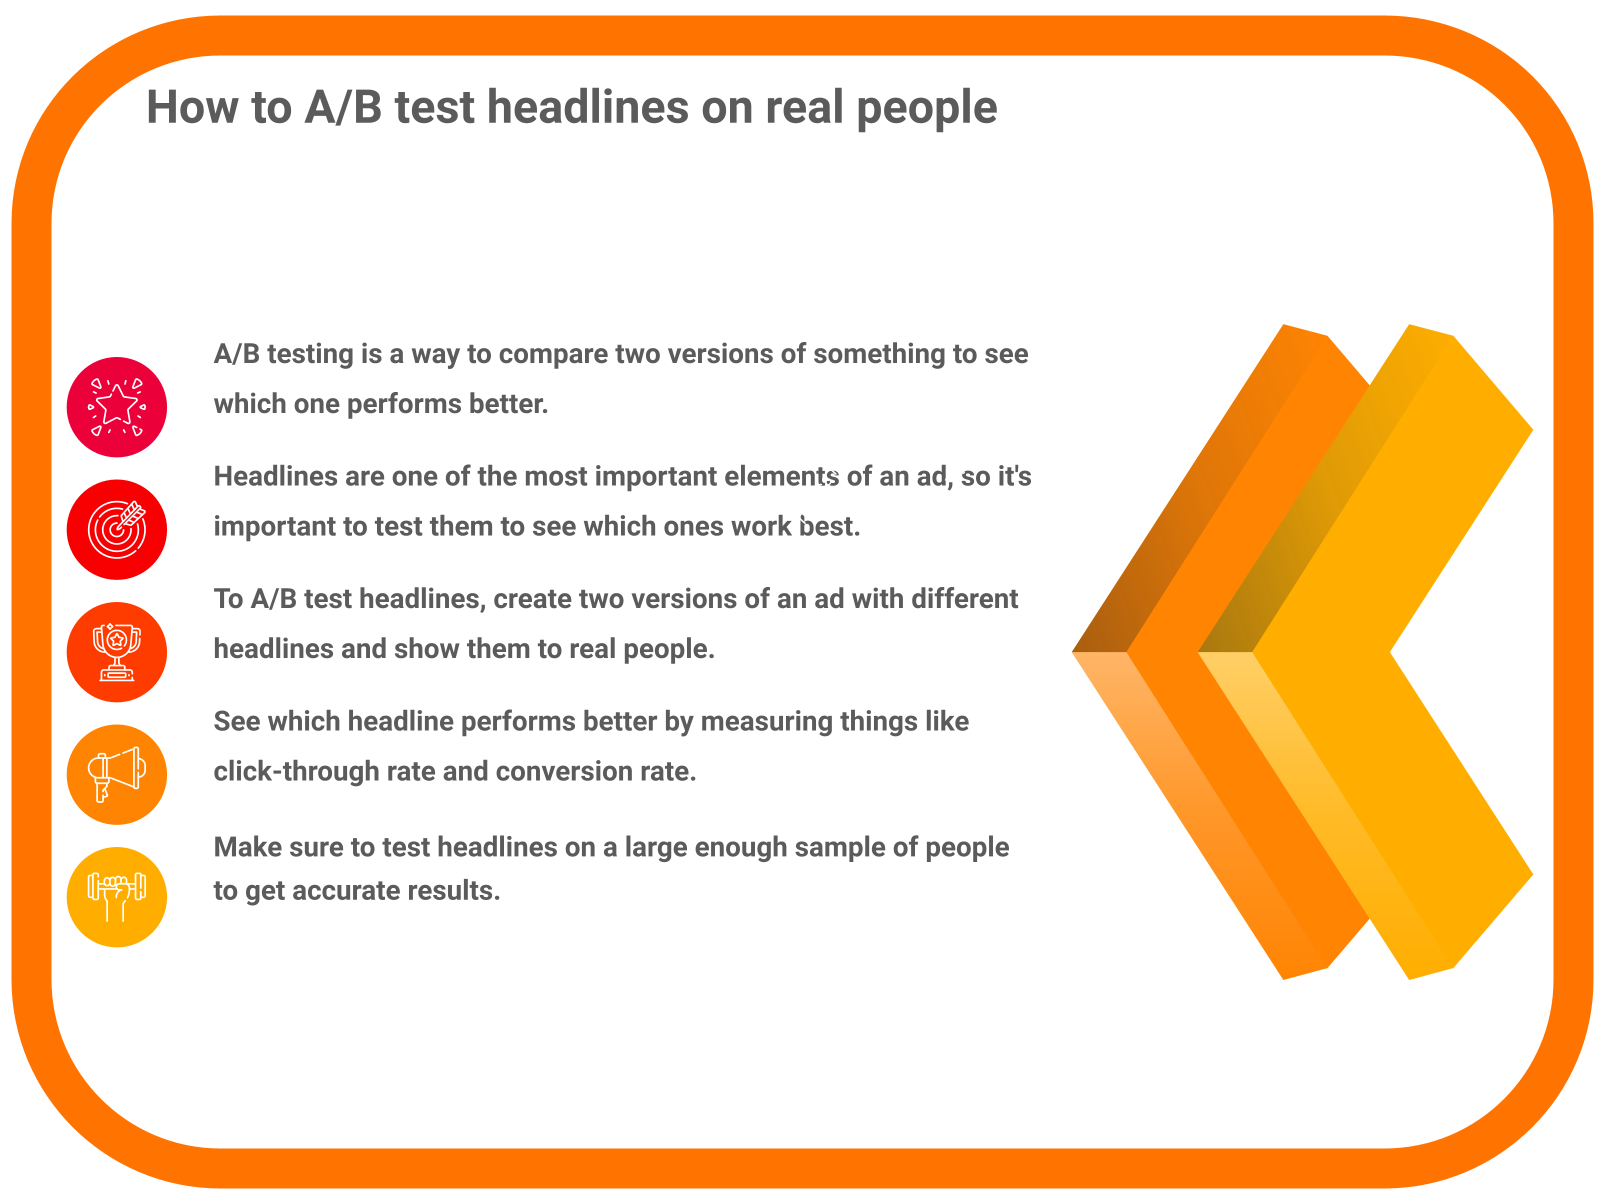 A/B test headlines with real people.